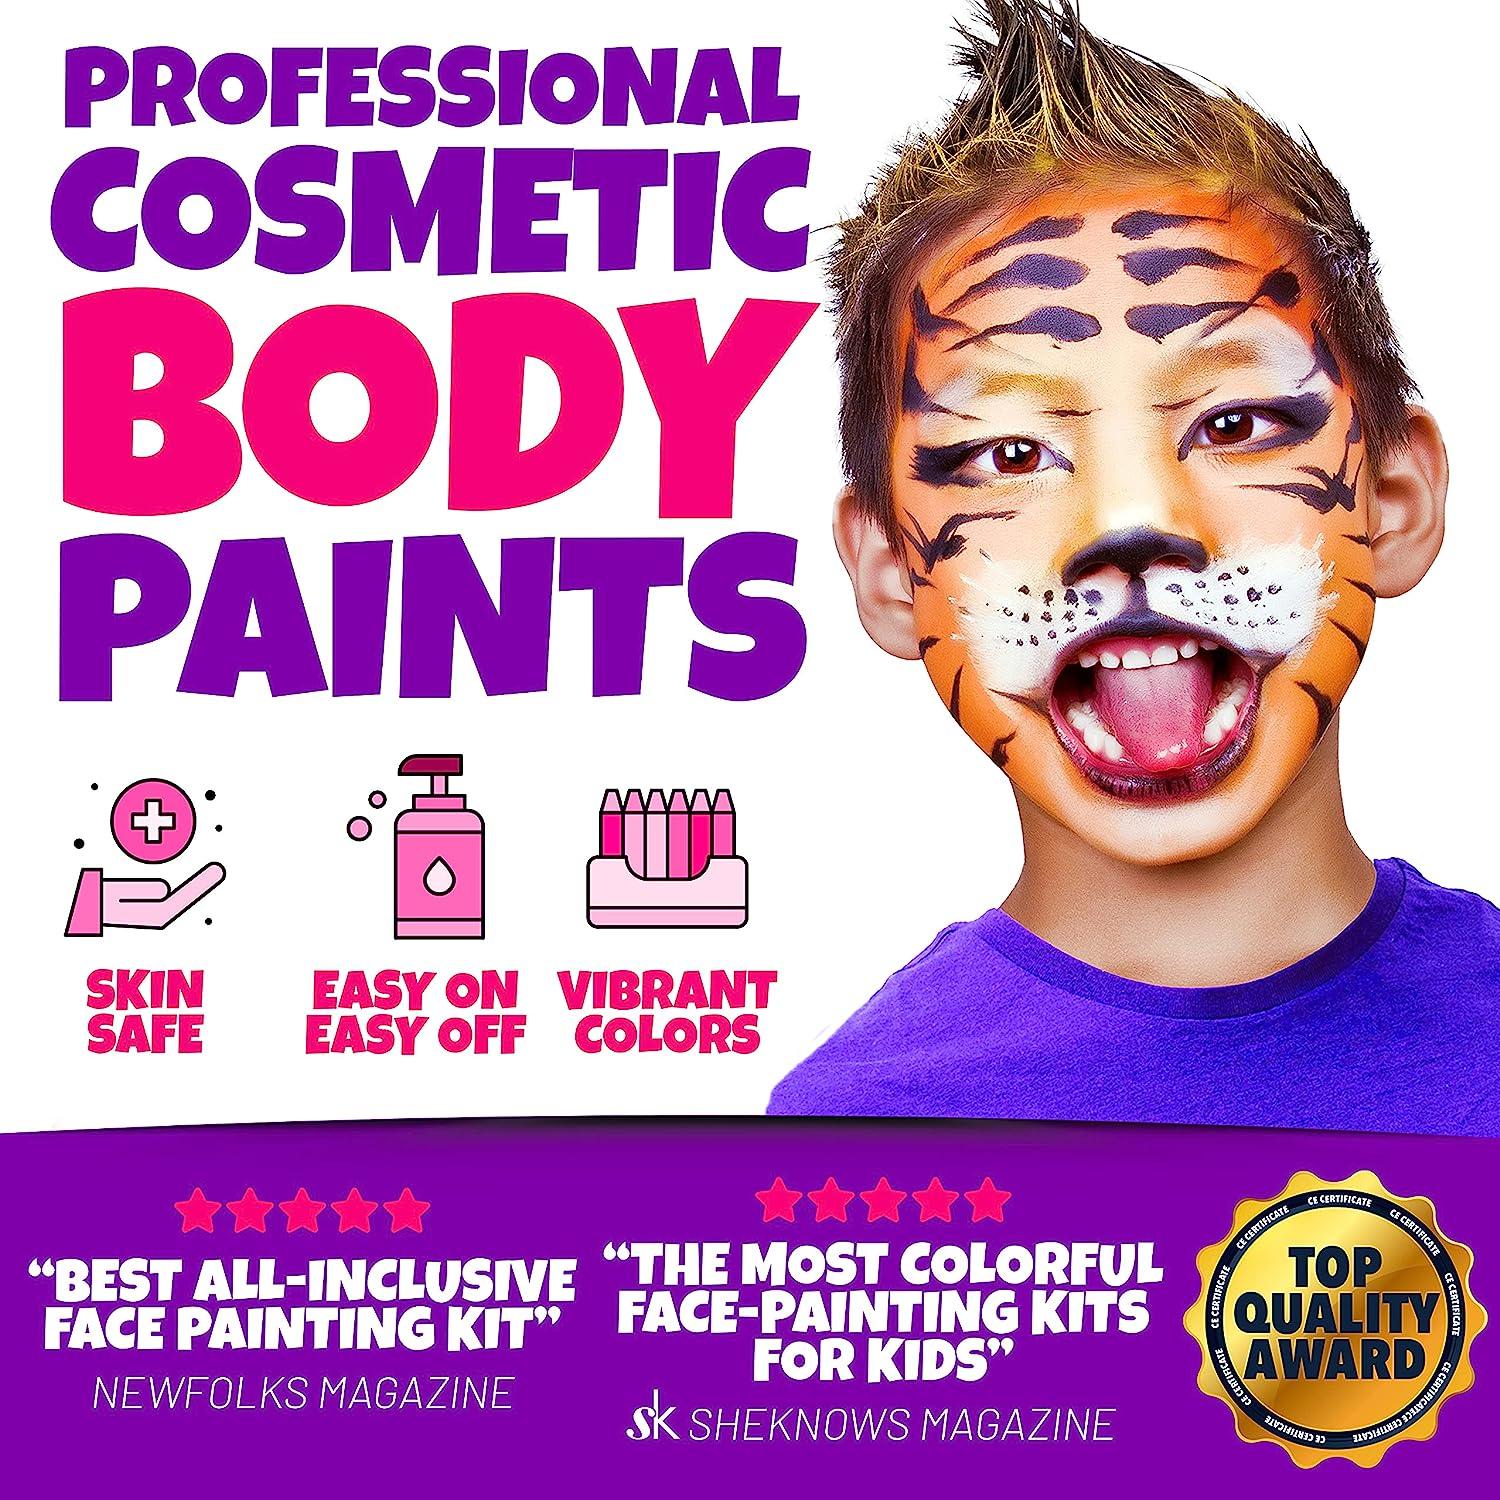 Face Paint Kit for Kids, Professional Quality Face & Body Paint, Hypoallergenic Safe & Non-Toxic, Easy to Painting and Washing, Ideal for Halloween